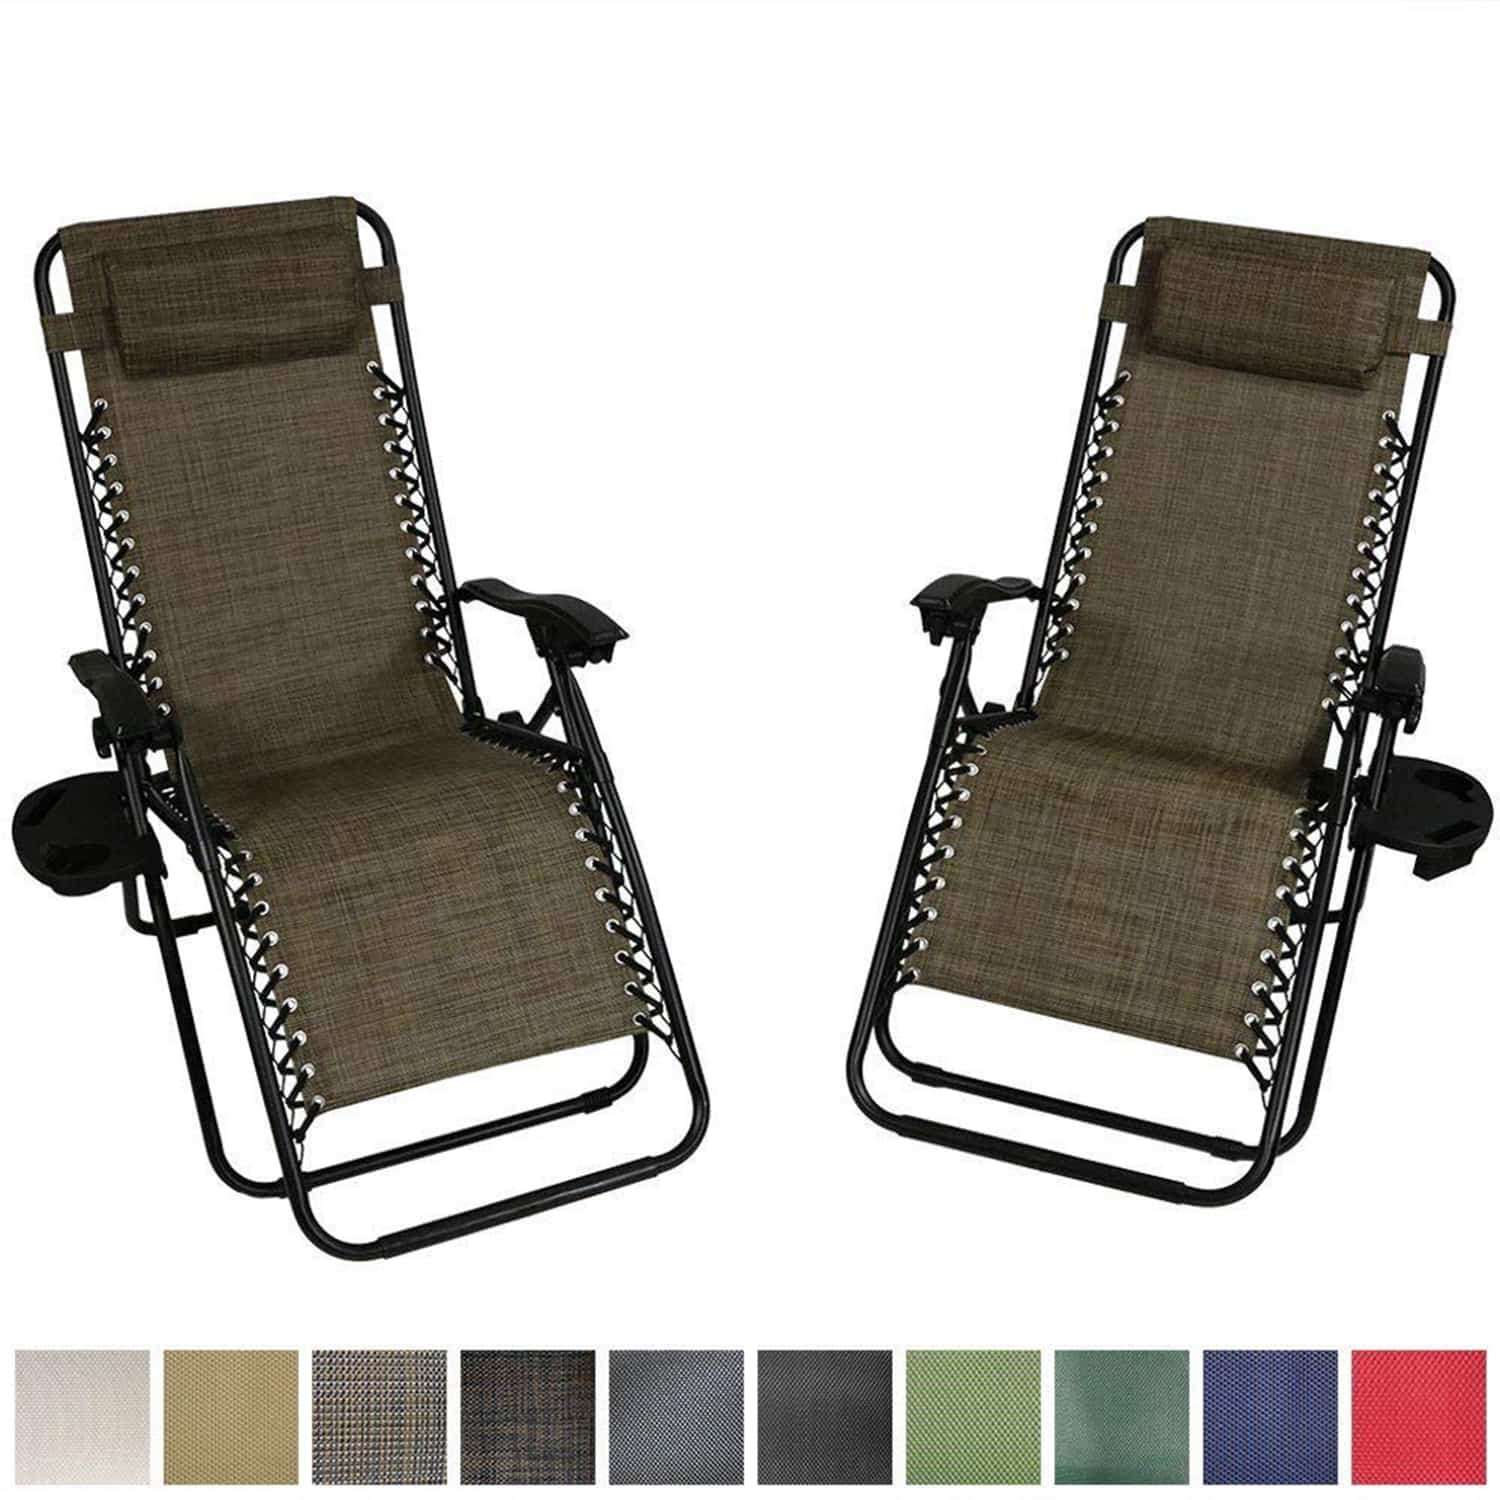 Top 10 Best Zero Gravity Chairs in 2022 | Great Outside